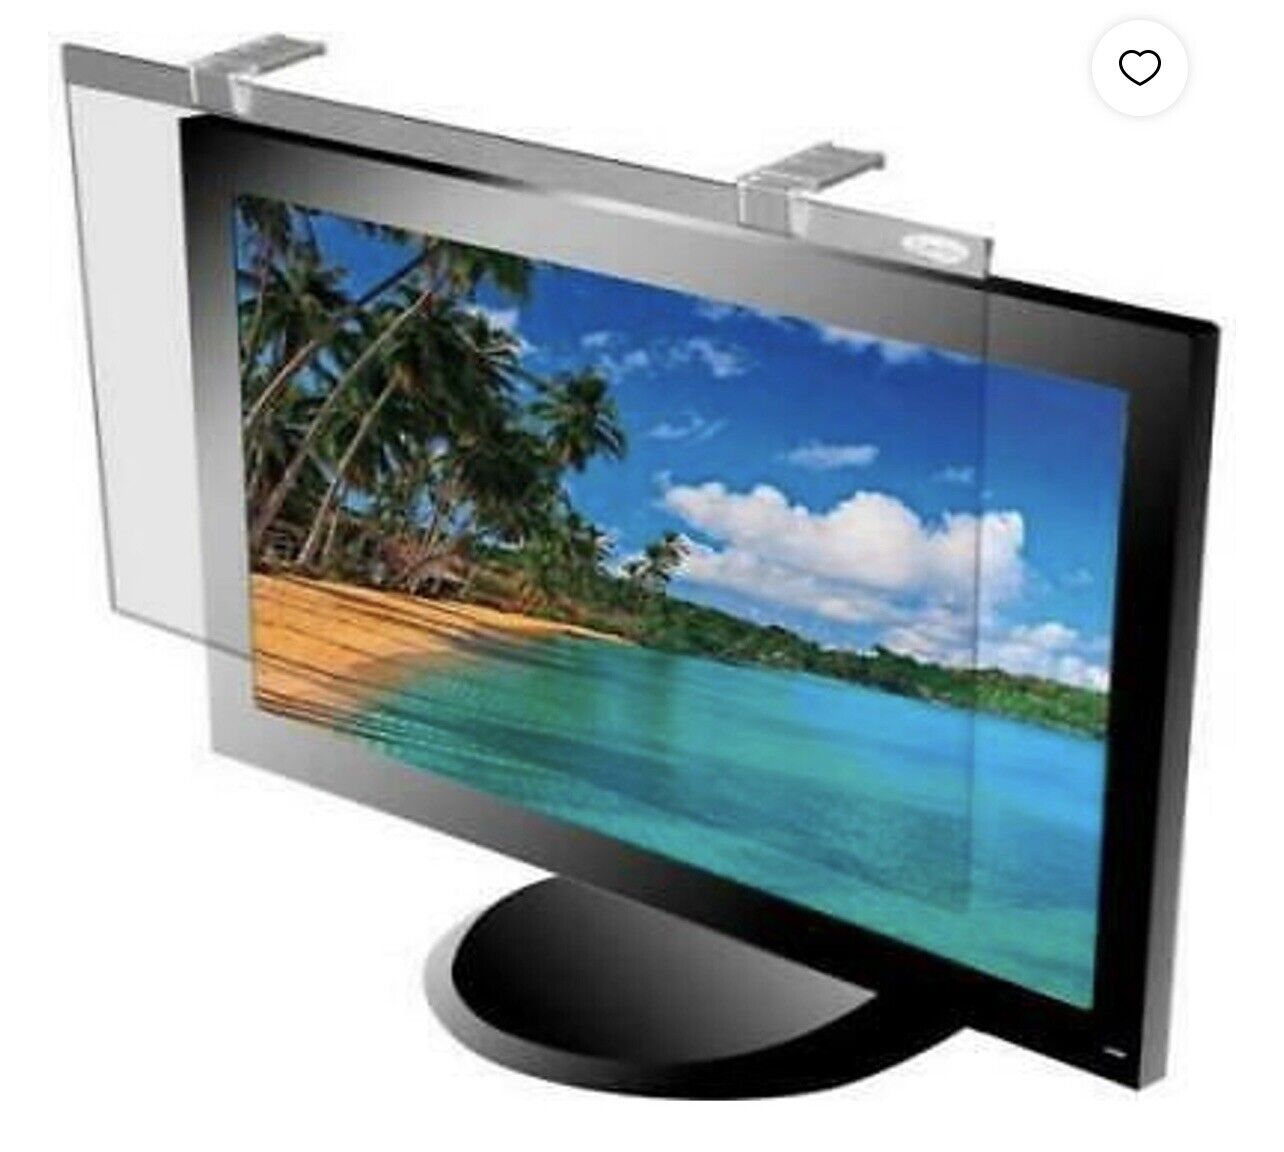 Kantek LCD Protect Deluxe Anti-Glare Filter for 21.5-Inch and 22-Inch Widescr...